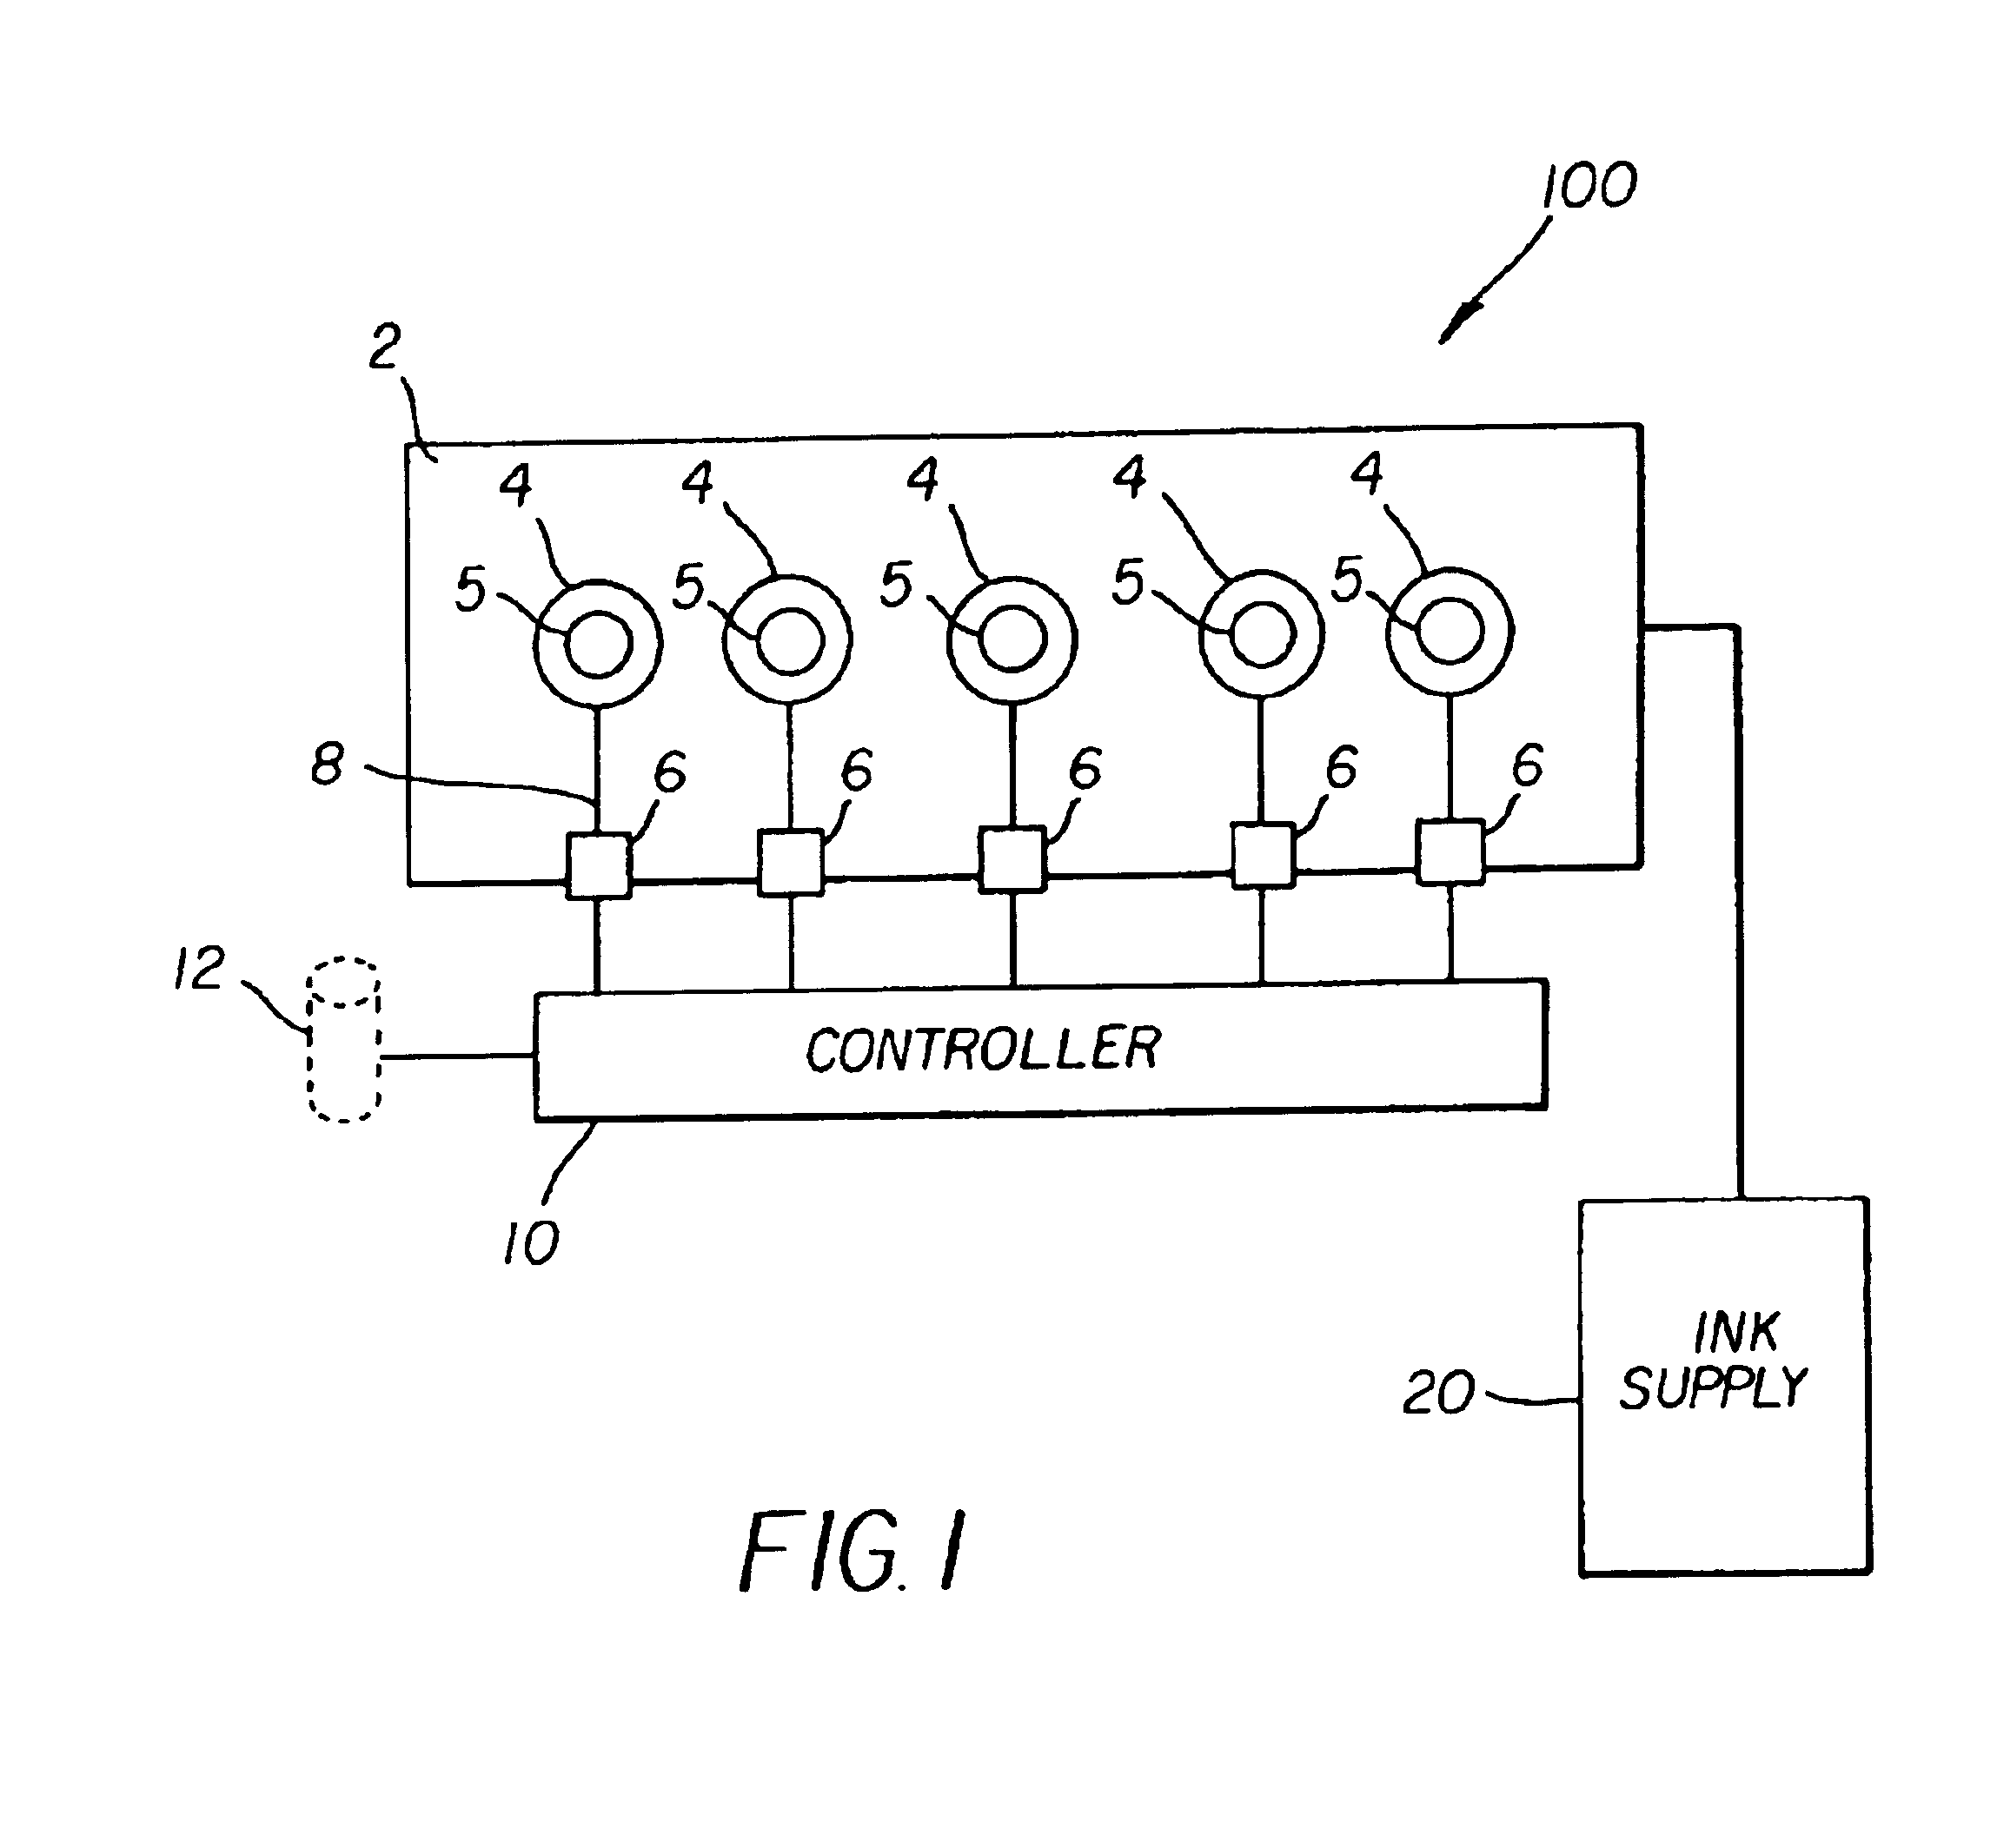 Apparatus and method for improving gas flow uniformity in a continuous stream ink jet printer